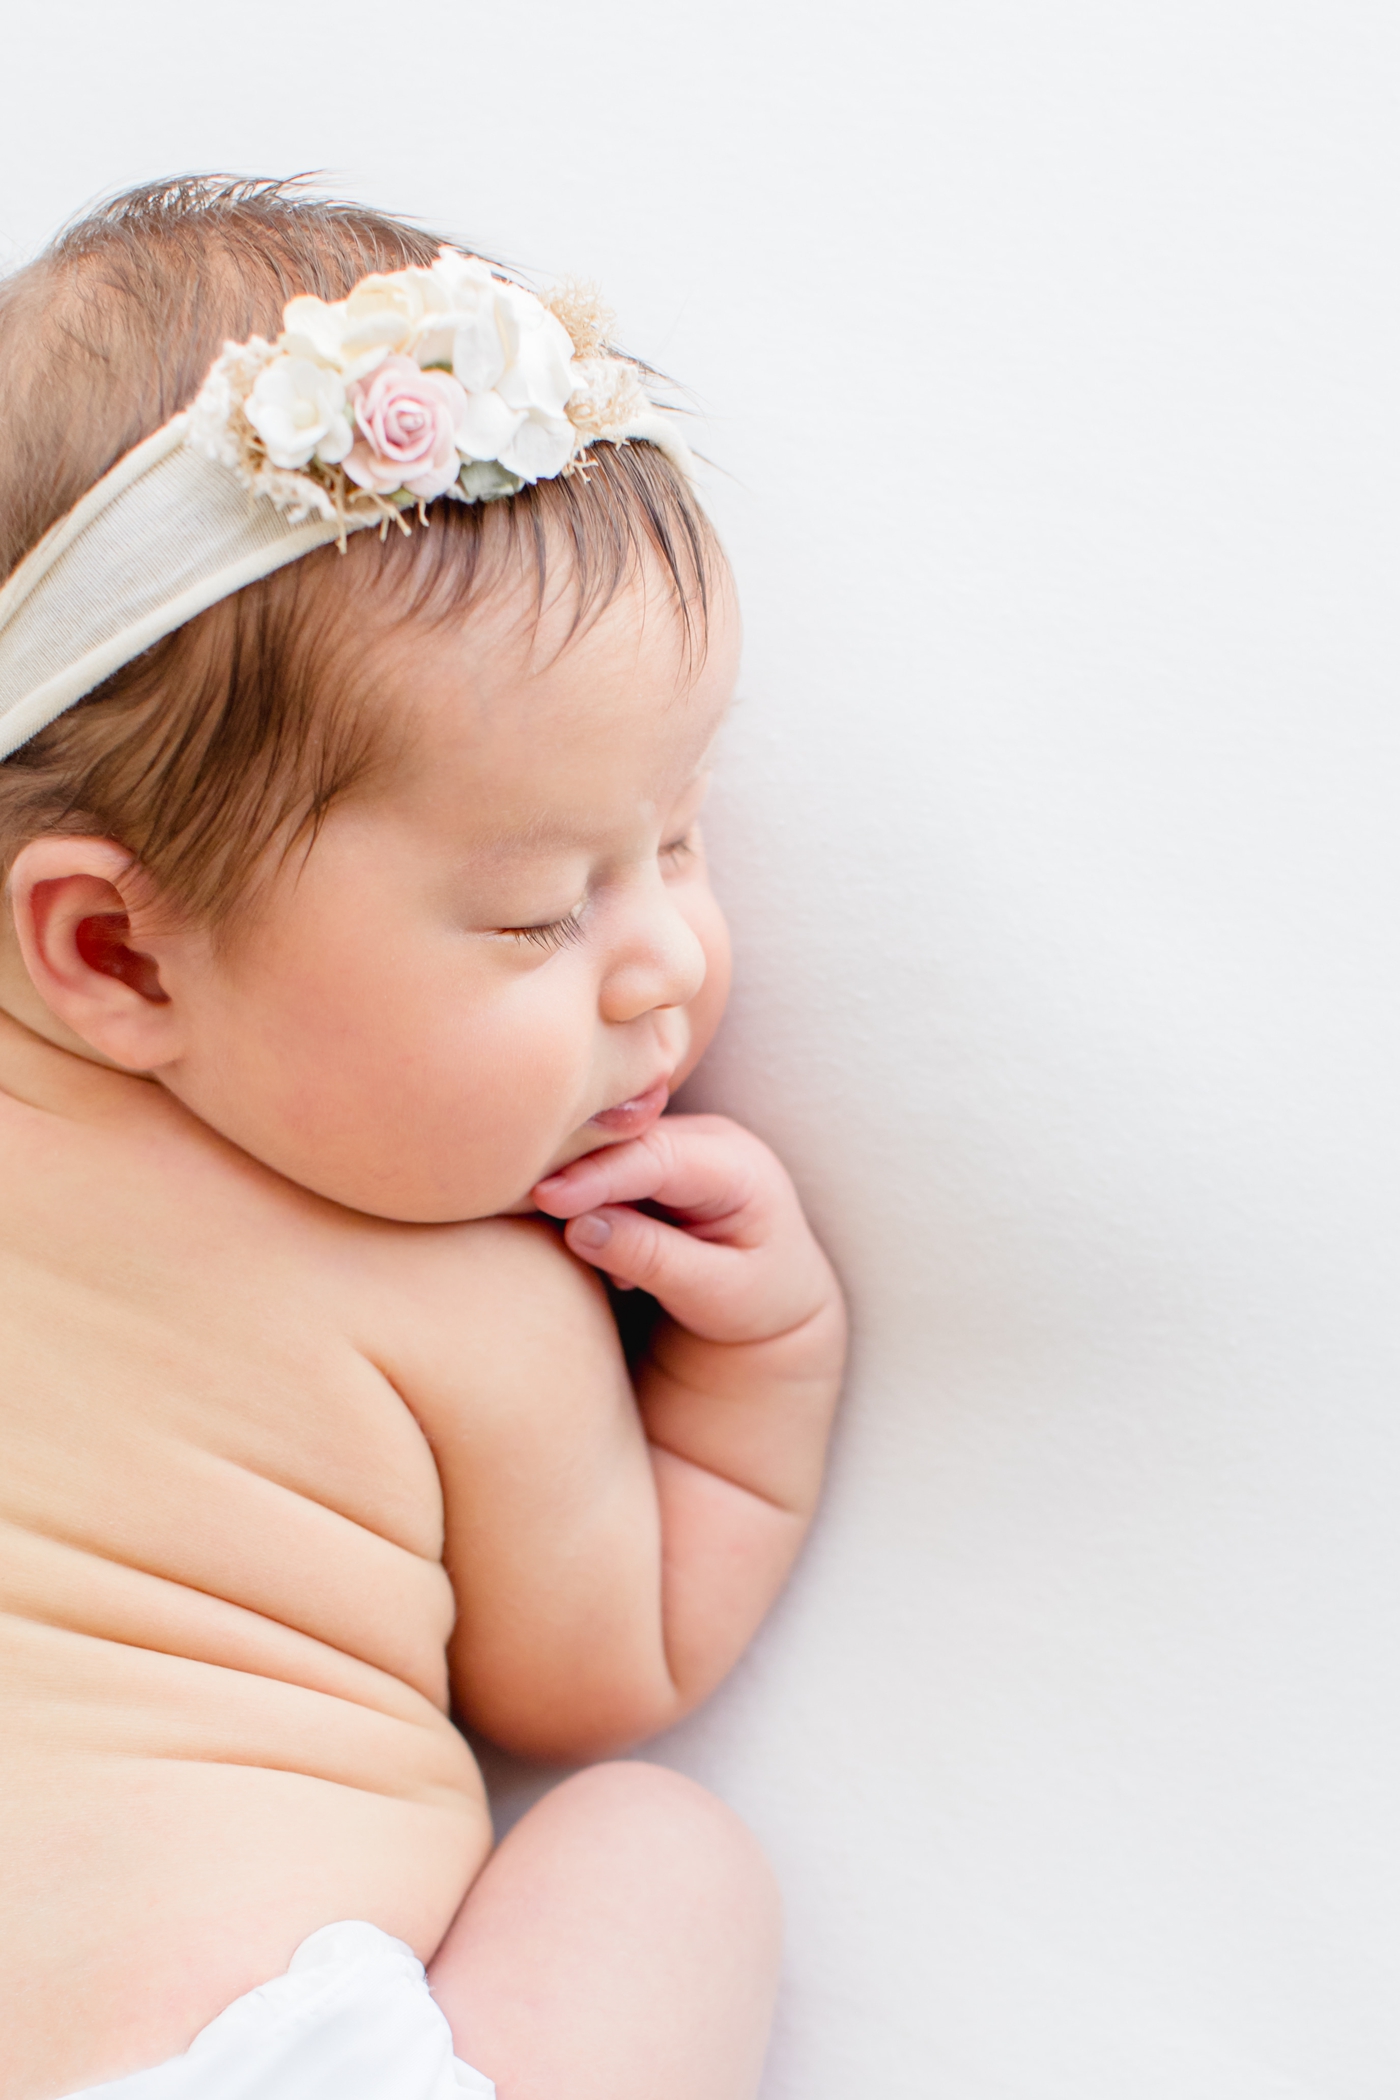 Closeup of baby girl with newborn rolls and floral headband during studio session. Photo by Austin TX baby photographer, Sana Ahmed Photography.